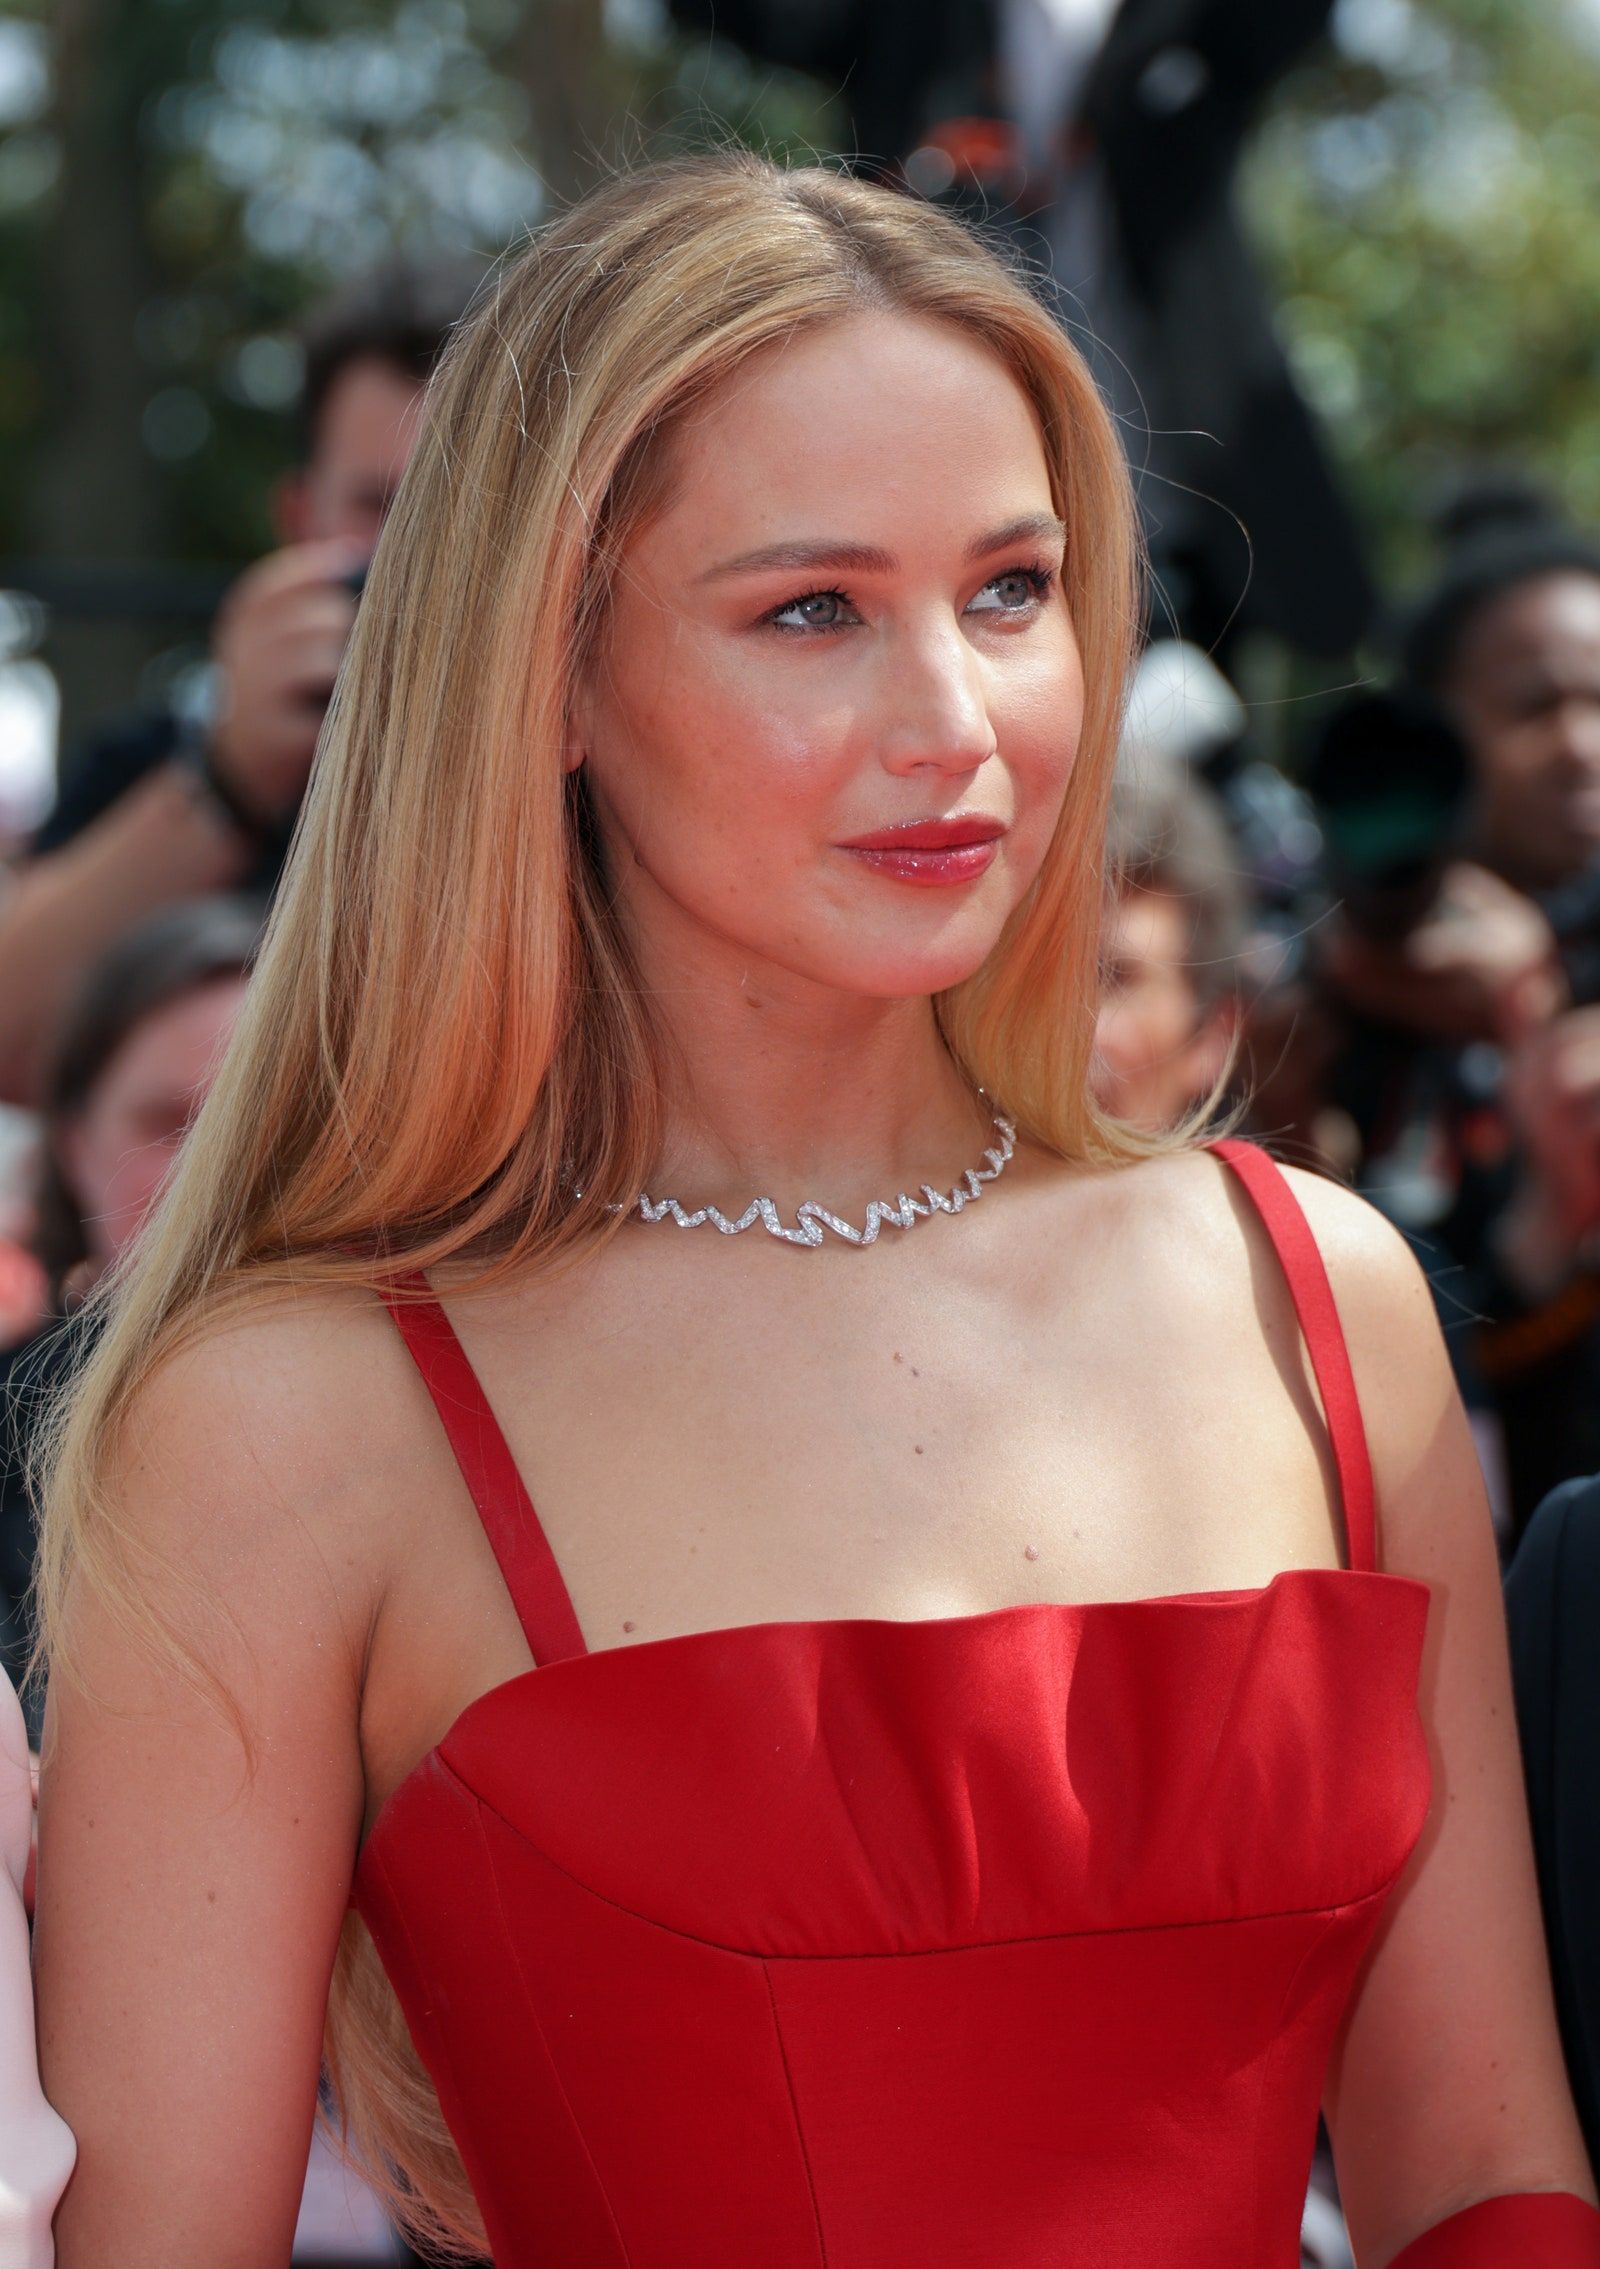 Jennifer Lawrence wears a red dress and diamond necklace at the premiere of Ocean's 8. - Jennifer Lawrence